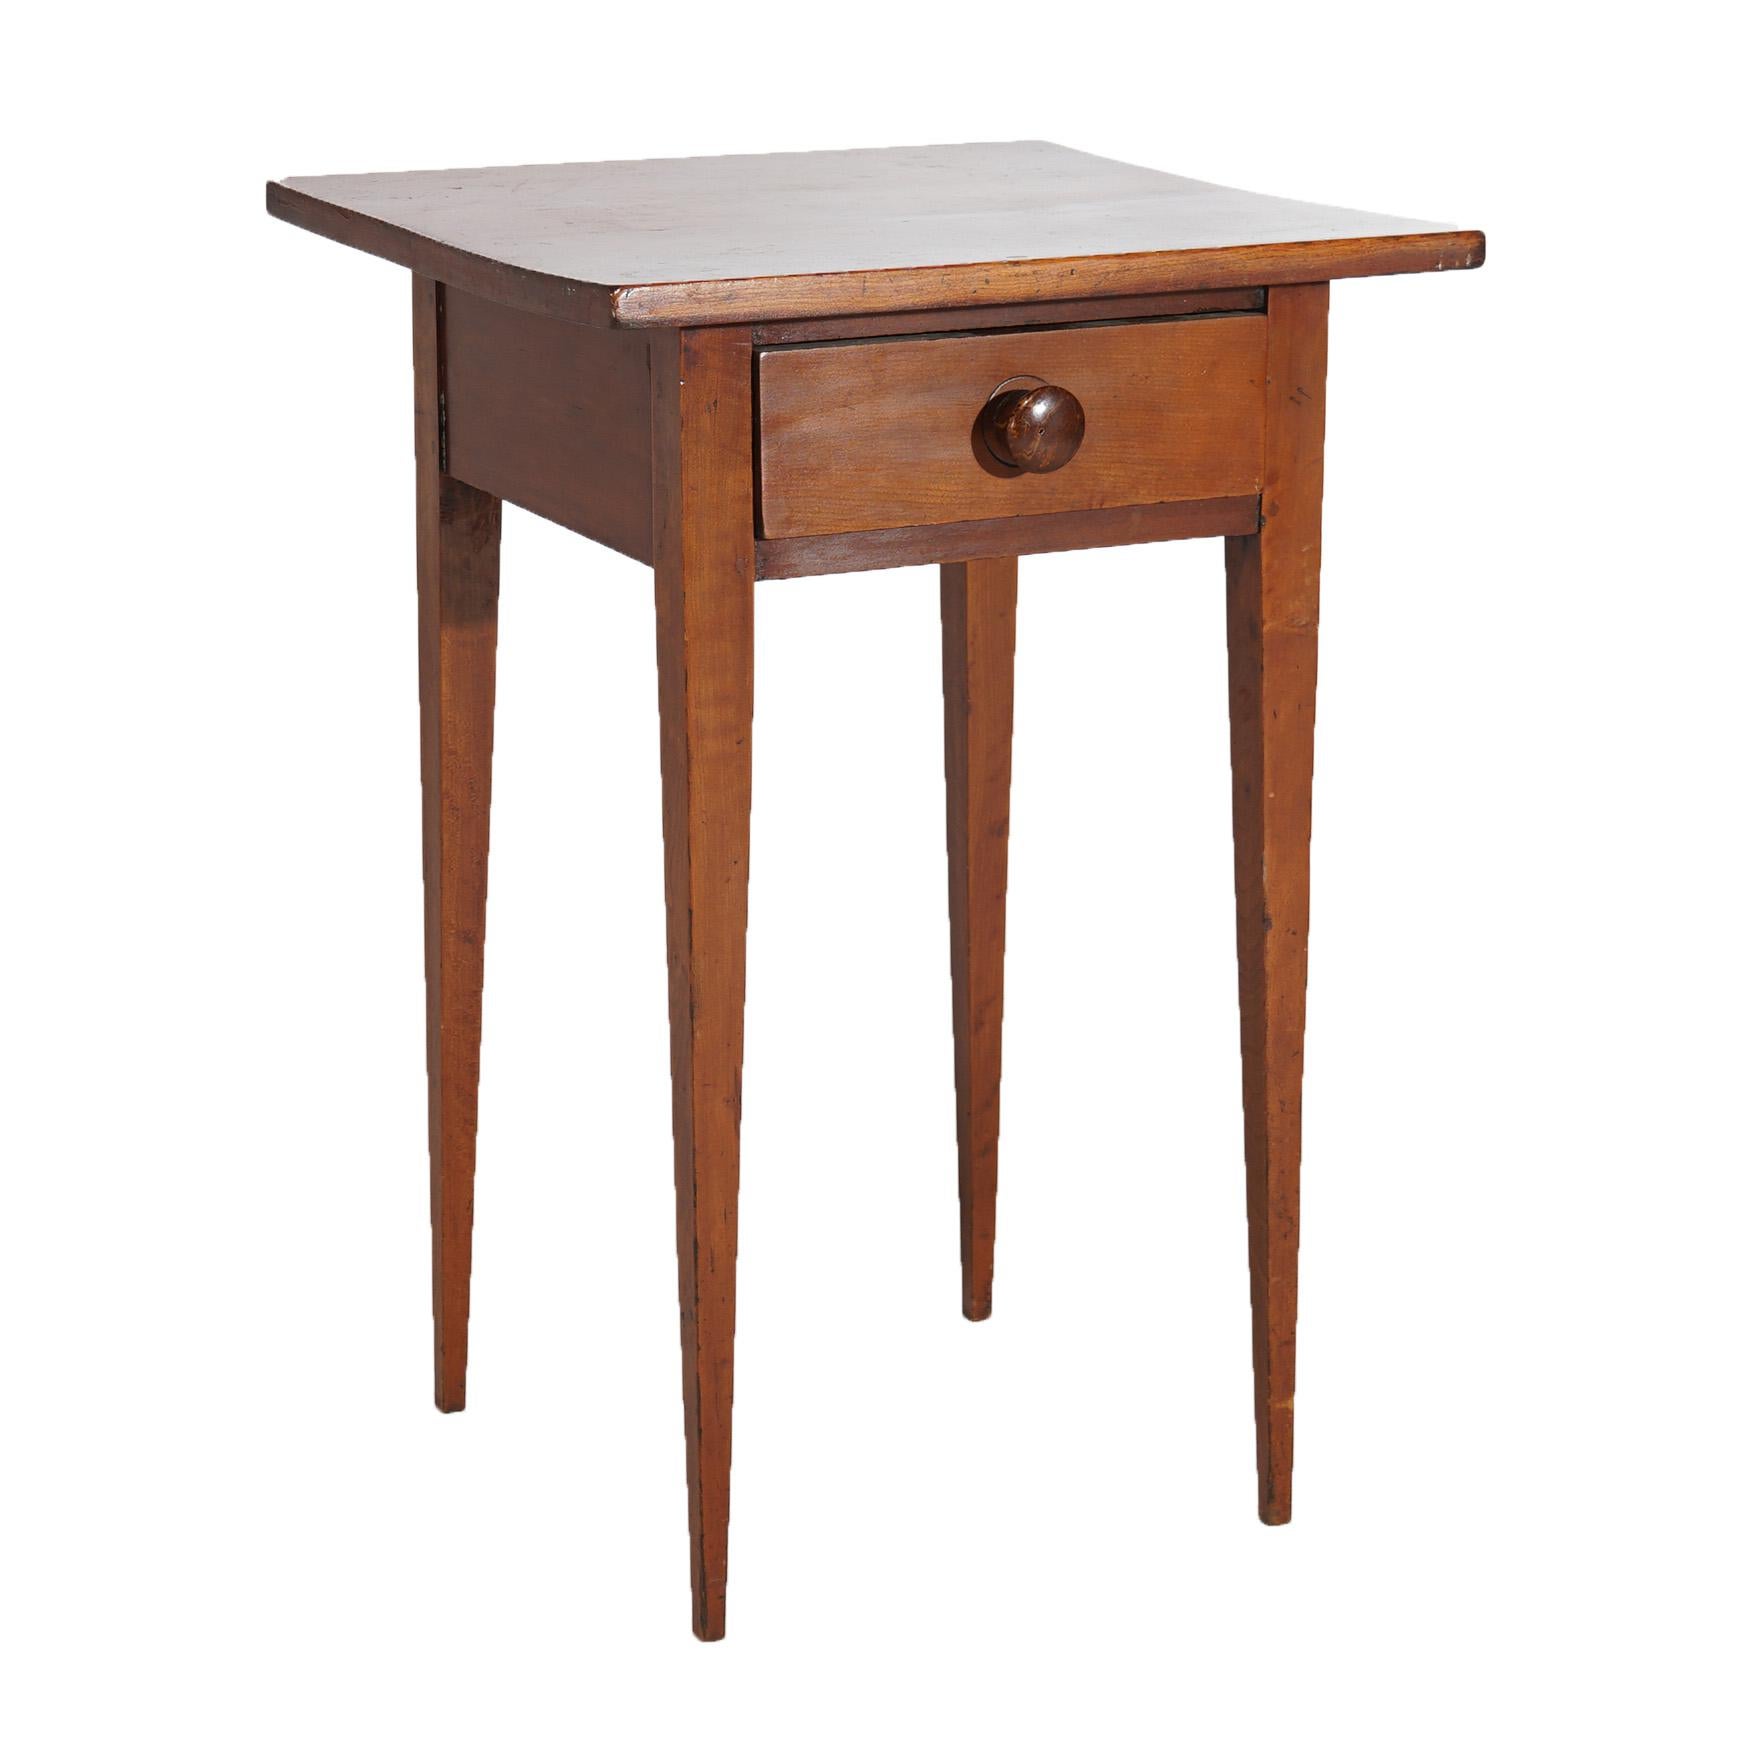 An antique Hepplewhite form side stand offers cherry construction with square top over single drawer case, raised on tapered straight and square legs, c1830

Measures- 27.75''H x 18.75''W x 18.25''D